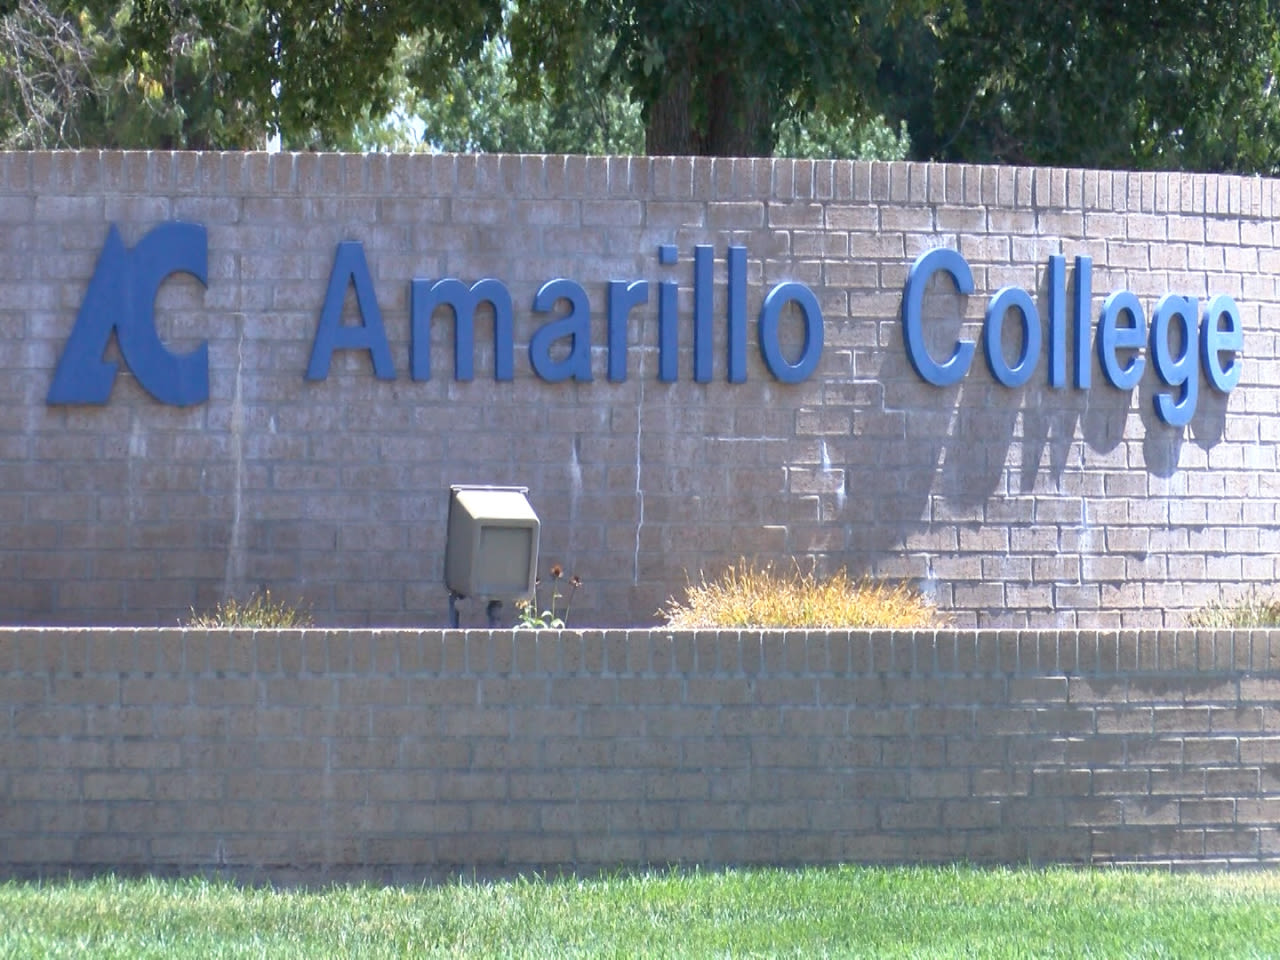 Amarillo College gears up for free June Jazz concerts